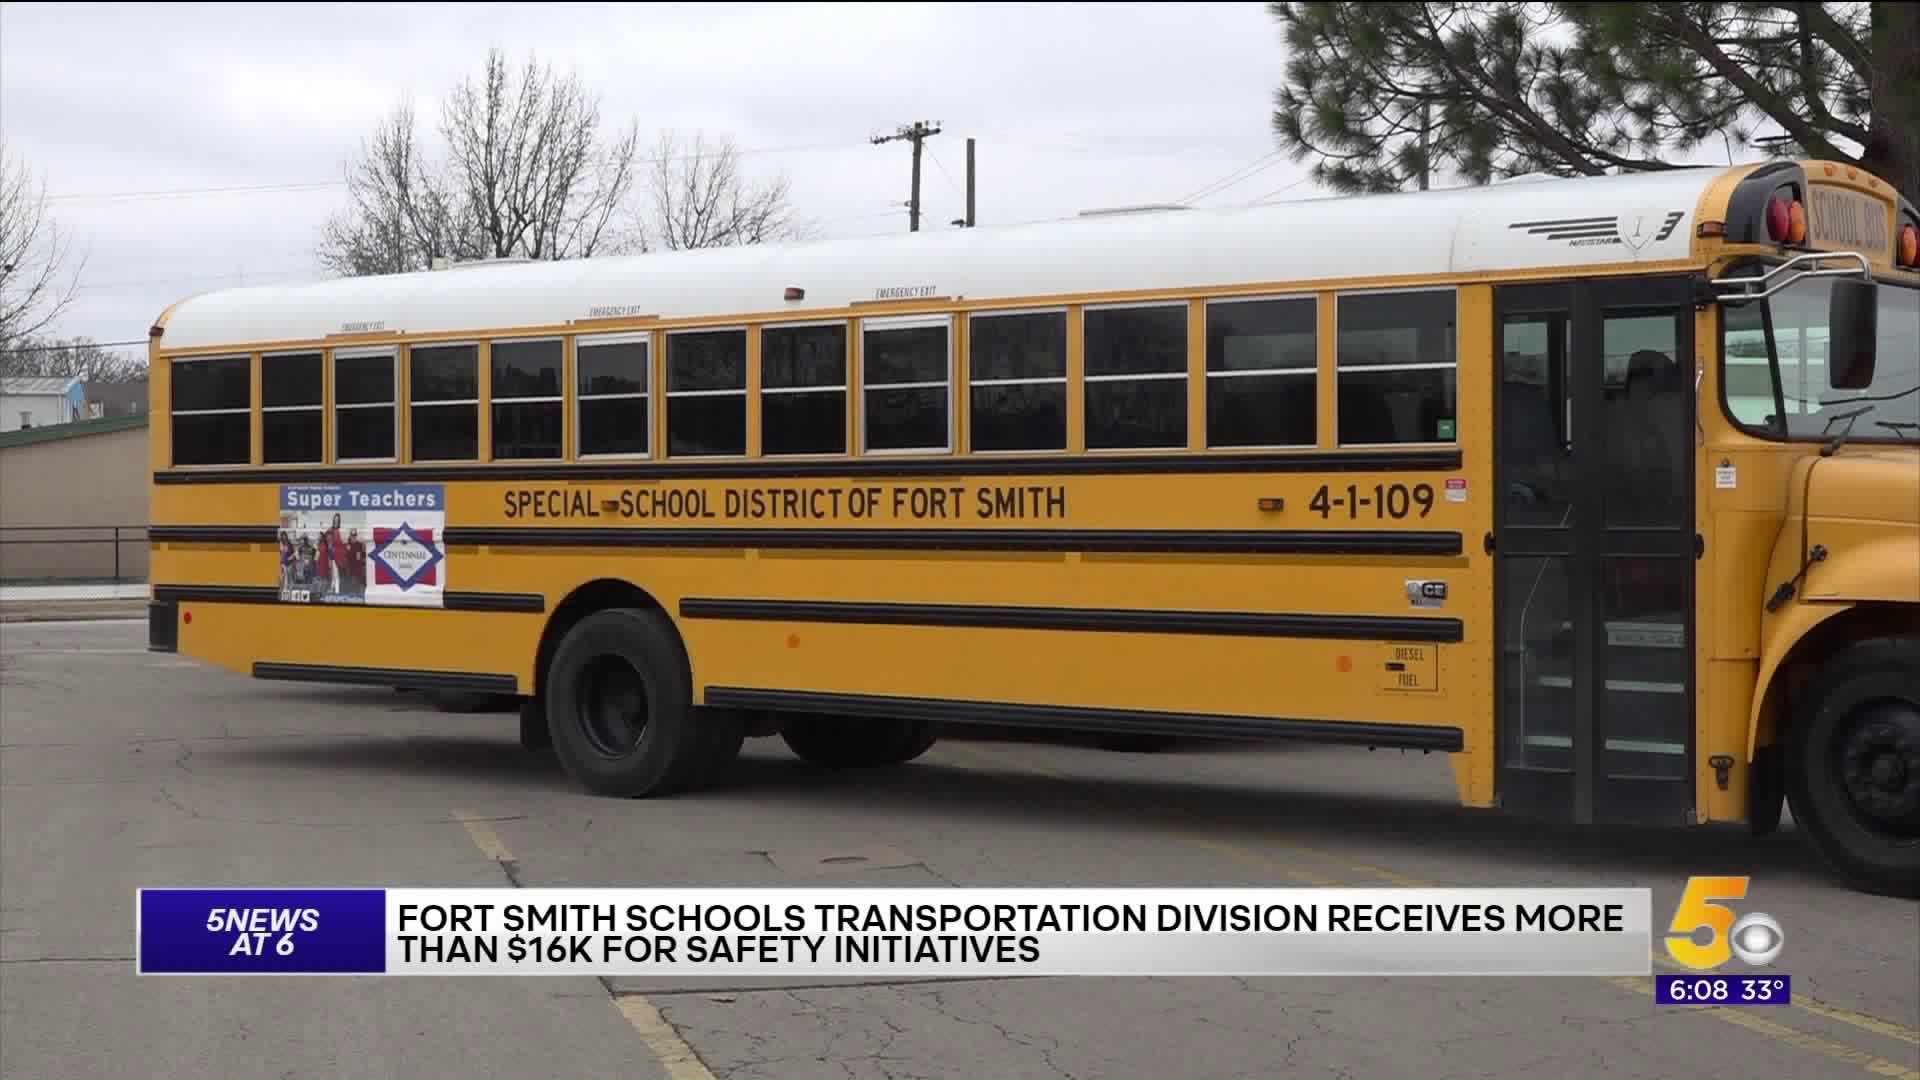 Fort Smith Schools Transportation Division Receives More Than $16K For Safety Initiatives